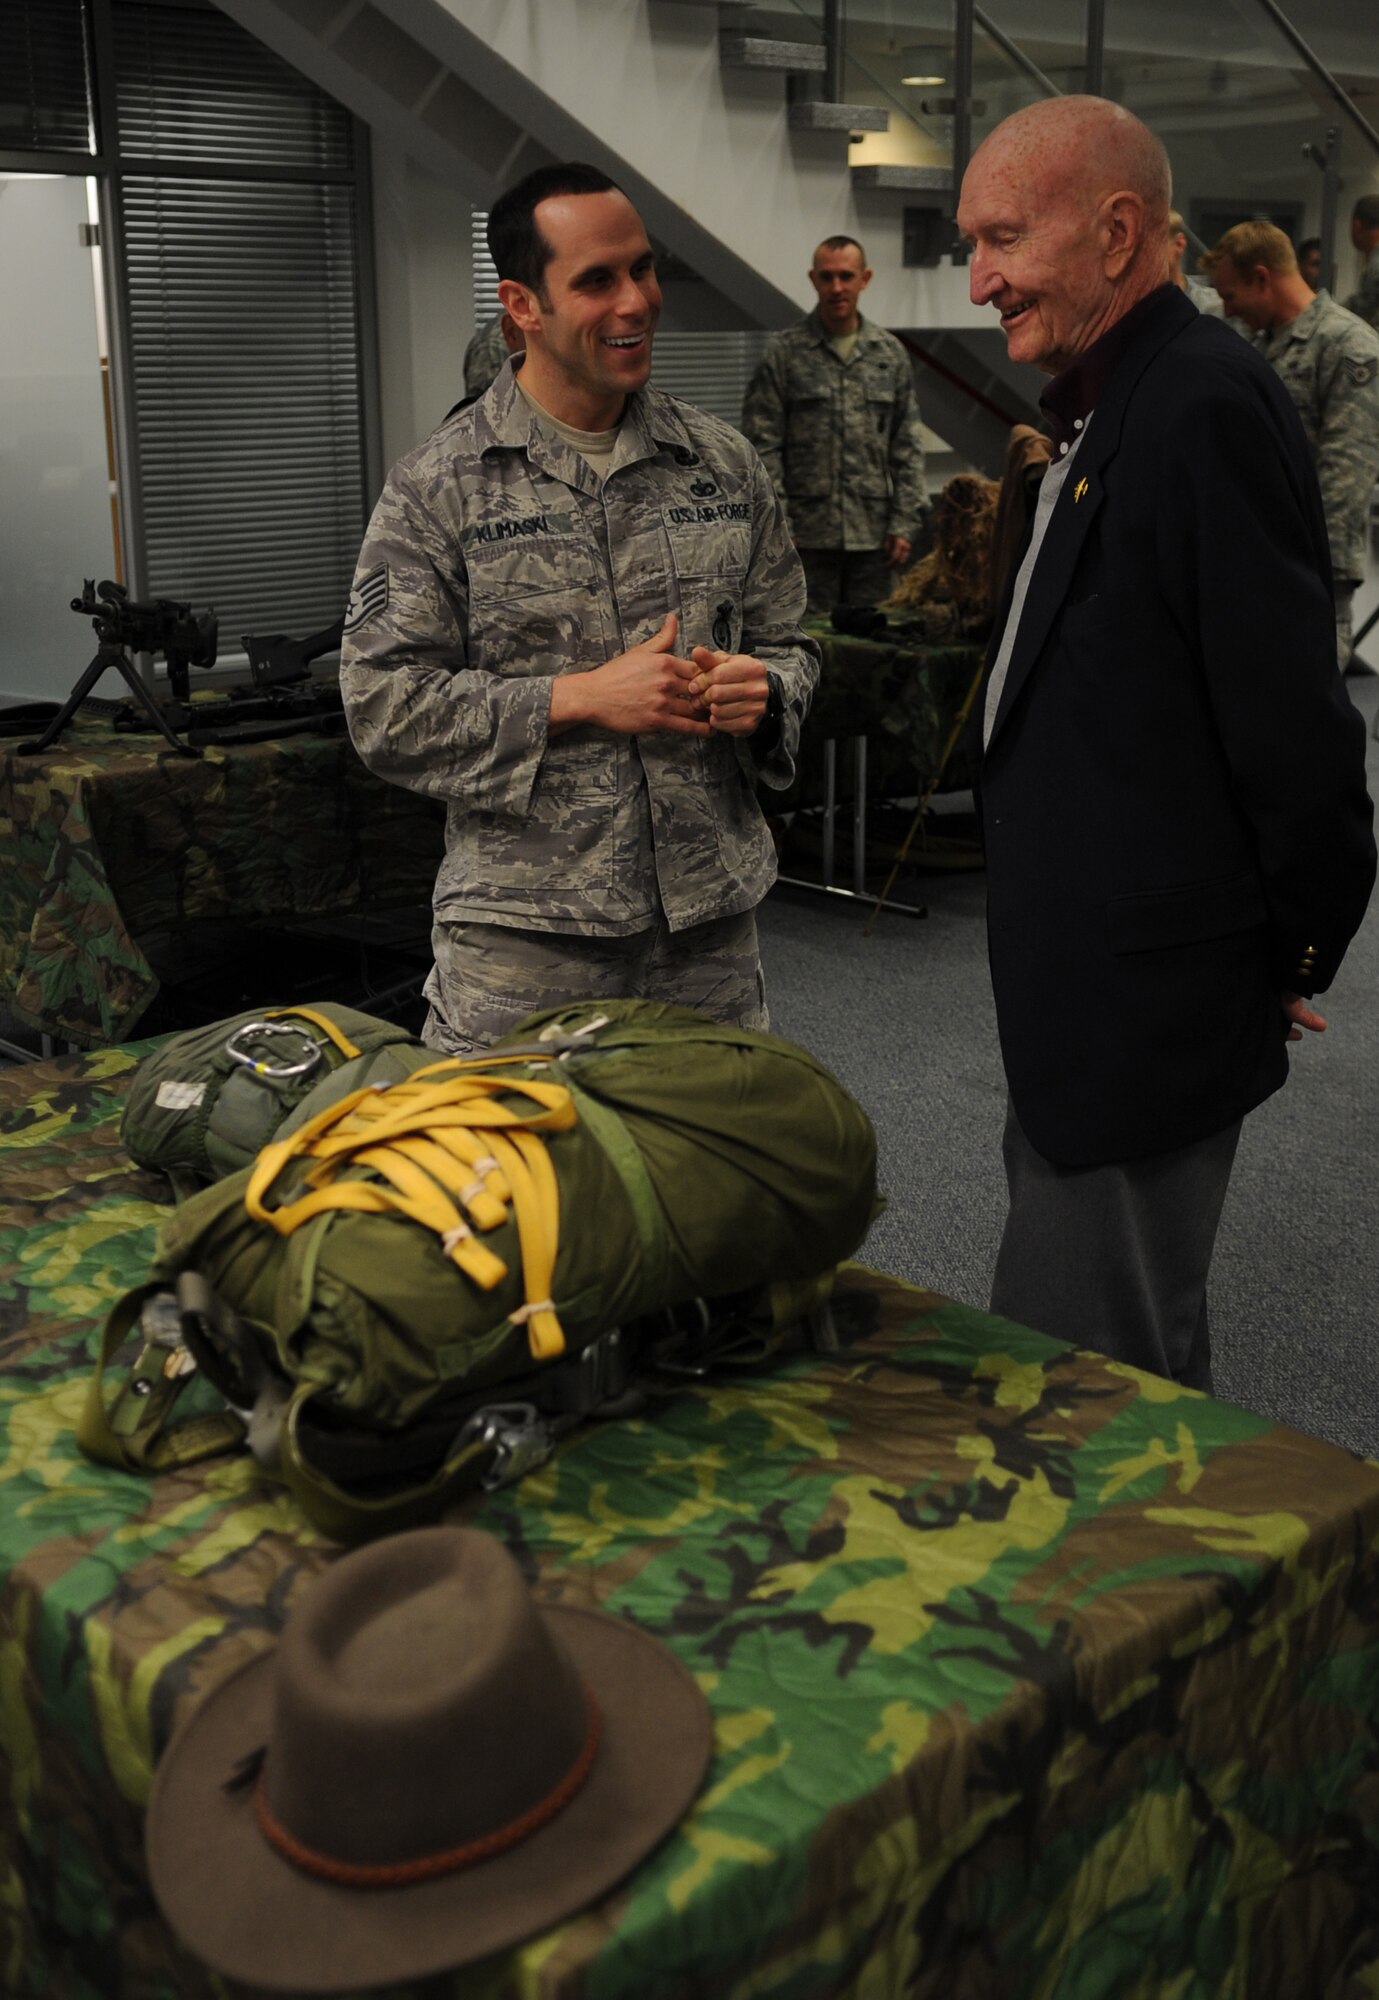 U.S. Air Force Staff Sgt. Joseph Klimaski, 435th Security Forces Squadron, speaks with retired Col. Gail Halvorsen during a tour of the 435th Contingency Readiness Group, Ramstein Air Base, Germany, Oct. 15, 2010. Colonel Halvorsen, also known as the Berlin Candy Bomber, flew C-54 Skymasters during the Berlin Airlift and parachuted candy to children from his airplane. (U.S. Air Force photo by Senior Airman Caleb Pierce)